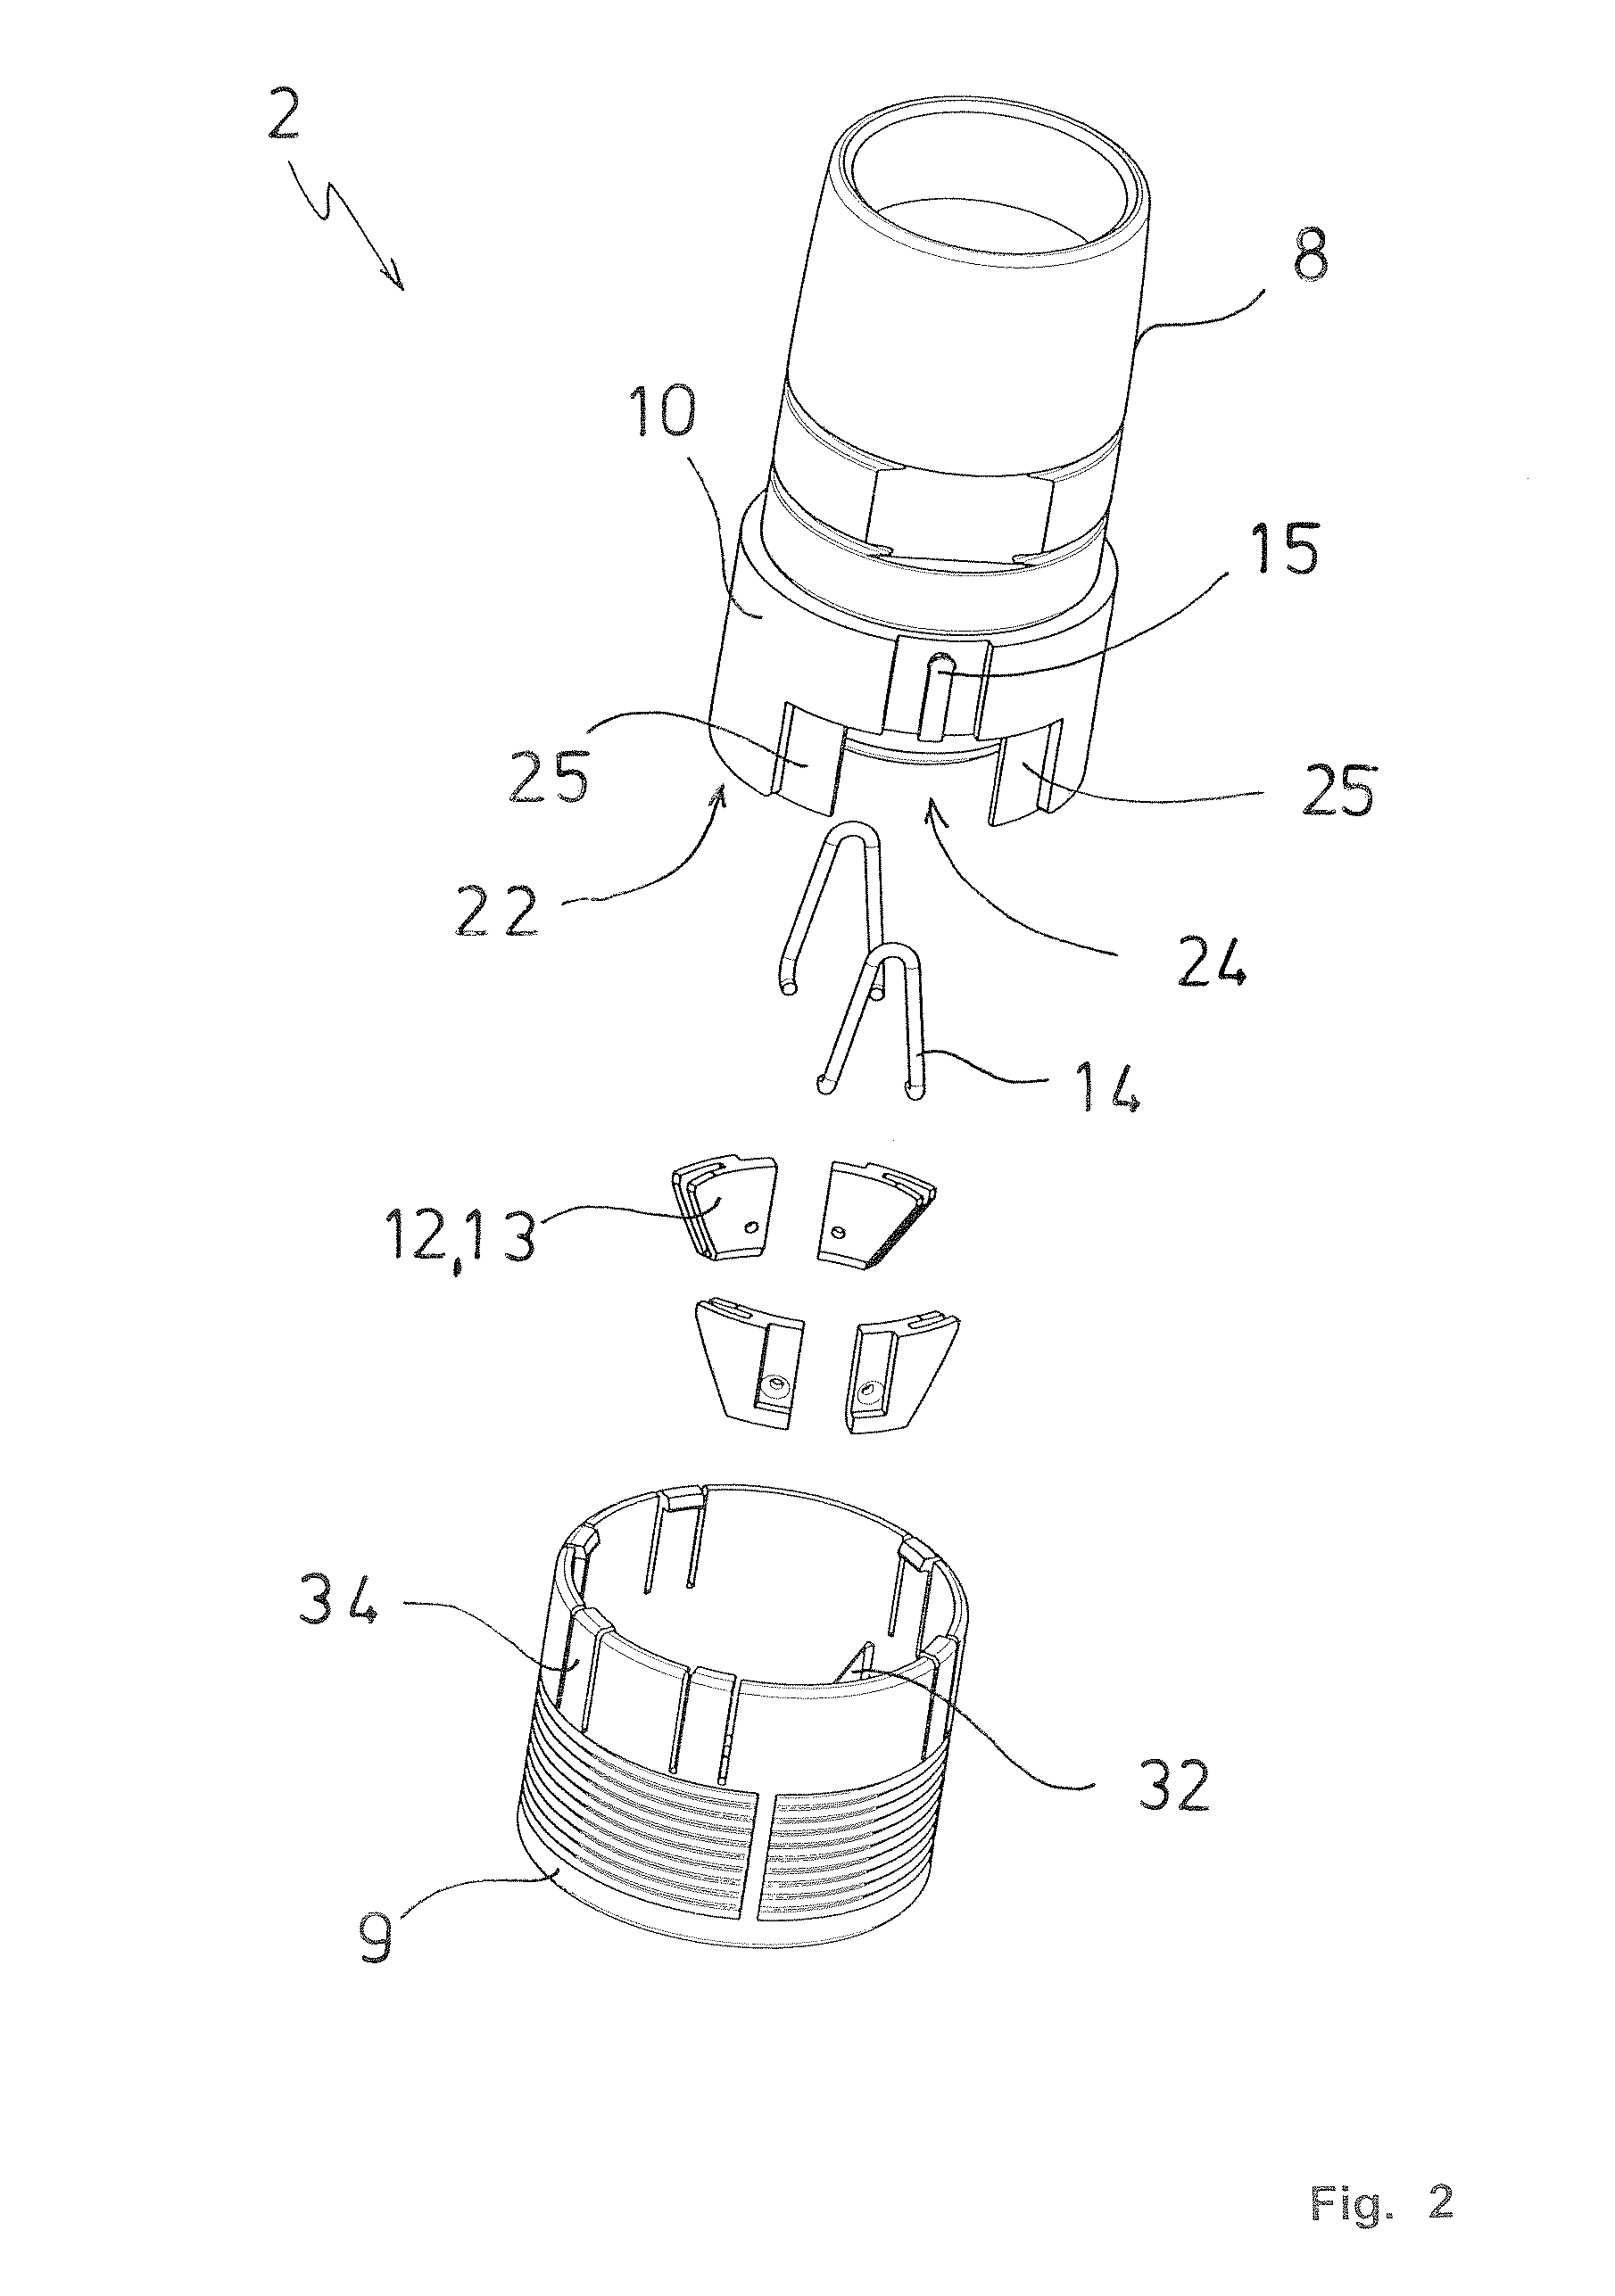 Electrical push-pull plug connector